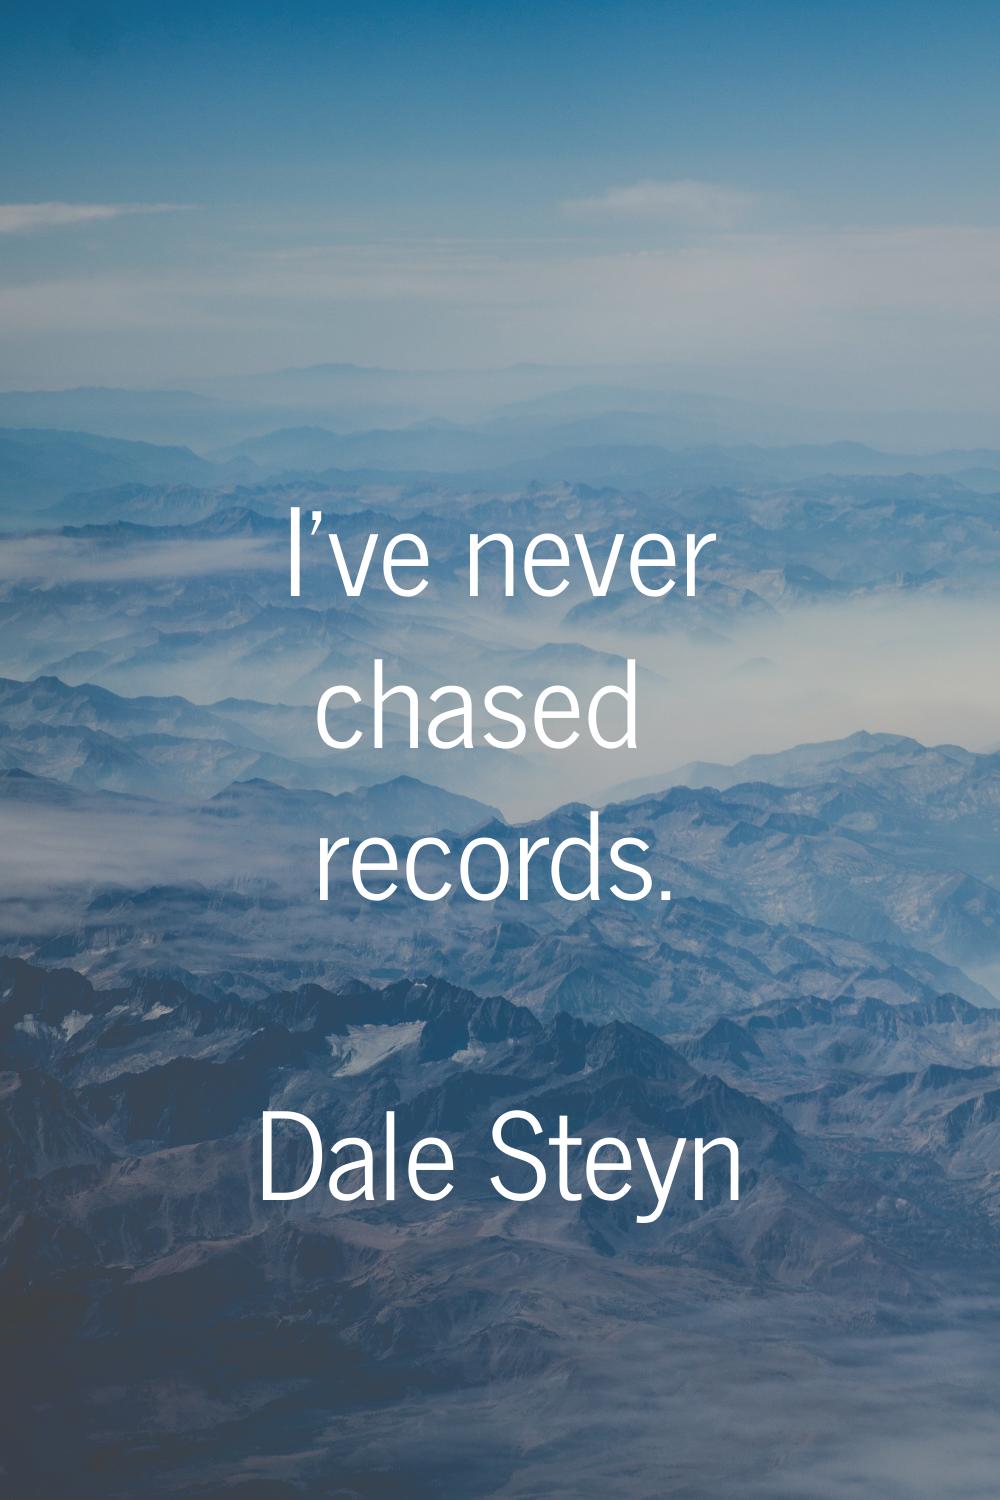 I've never chased records.